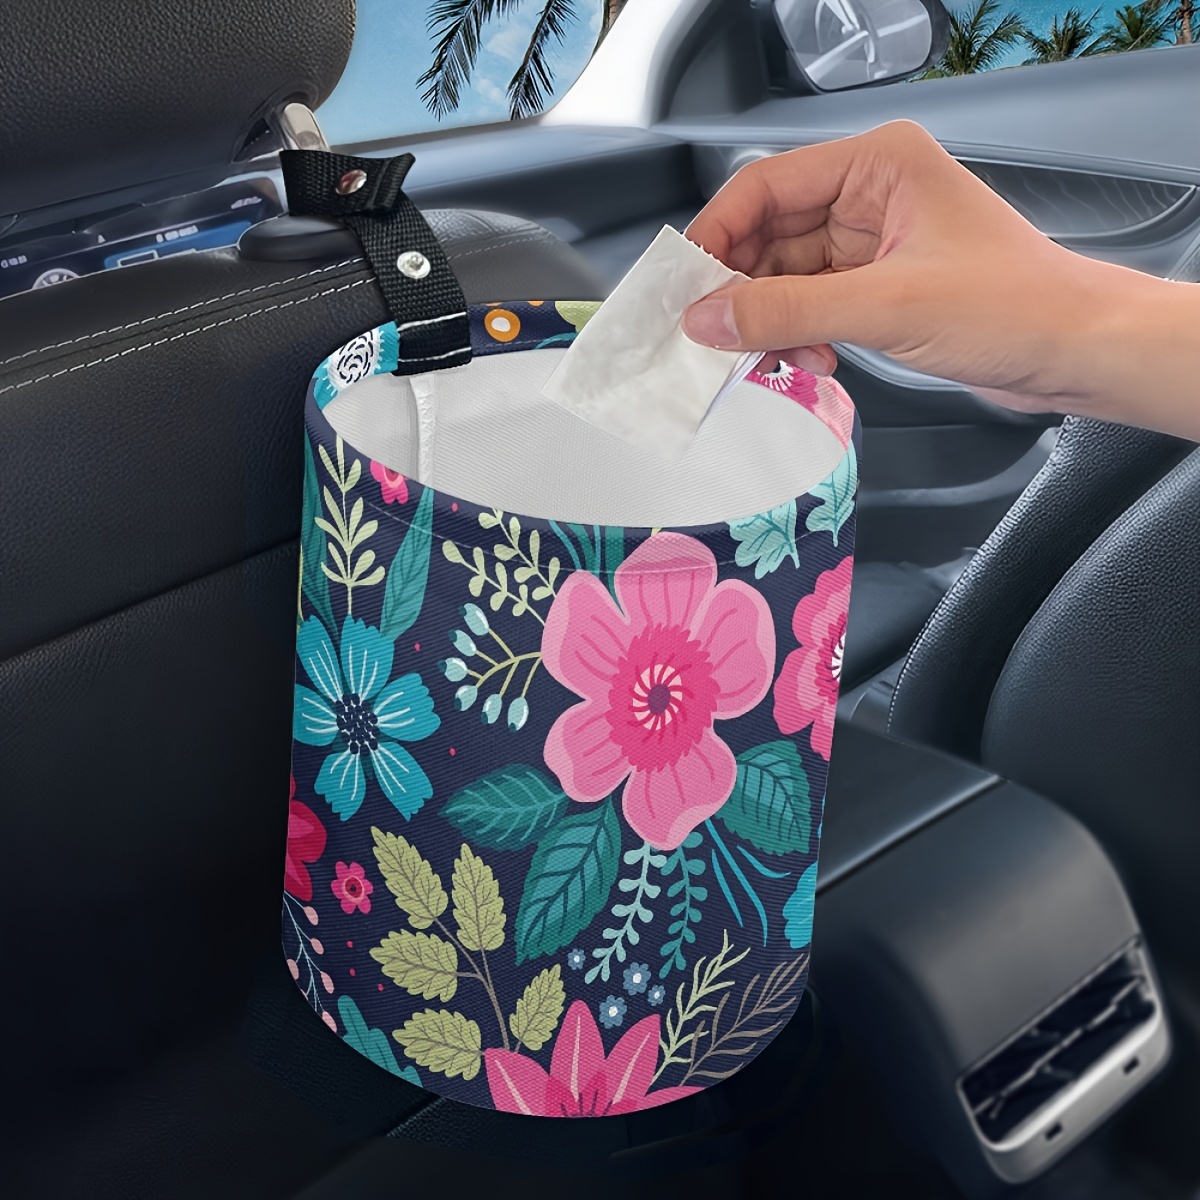 

1pc Beauty Flowers Pattern Car Trash Can - Trash Bin For Kitchen Camping, Car Interior Accessories For Women, Car Garbage Organizer, Car Decor